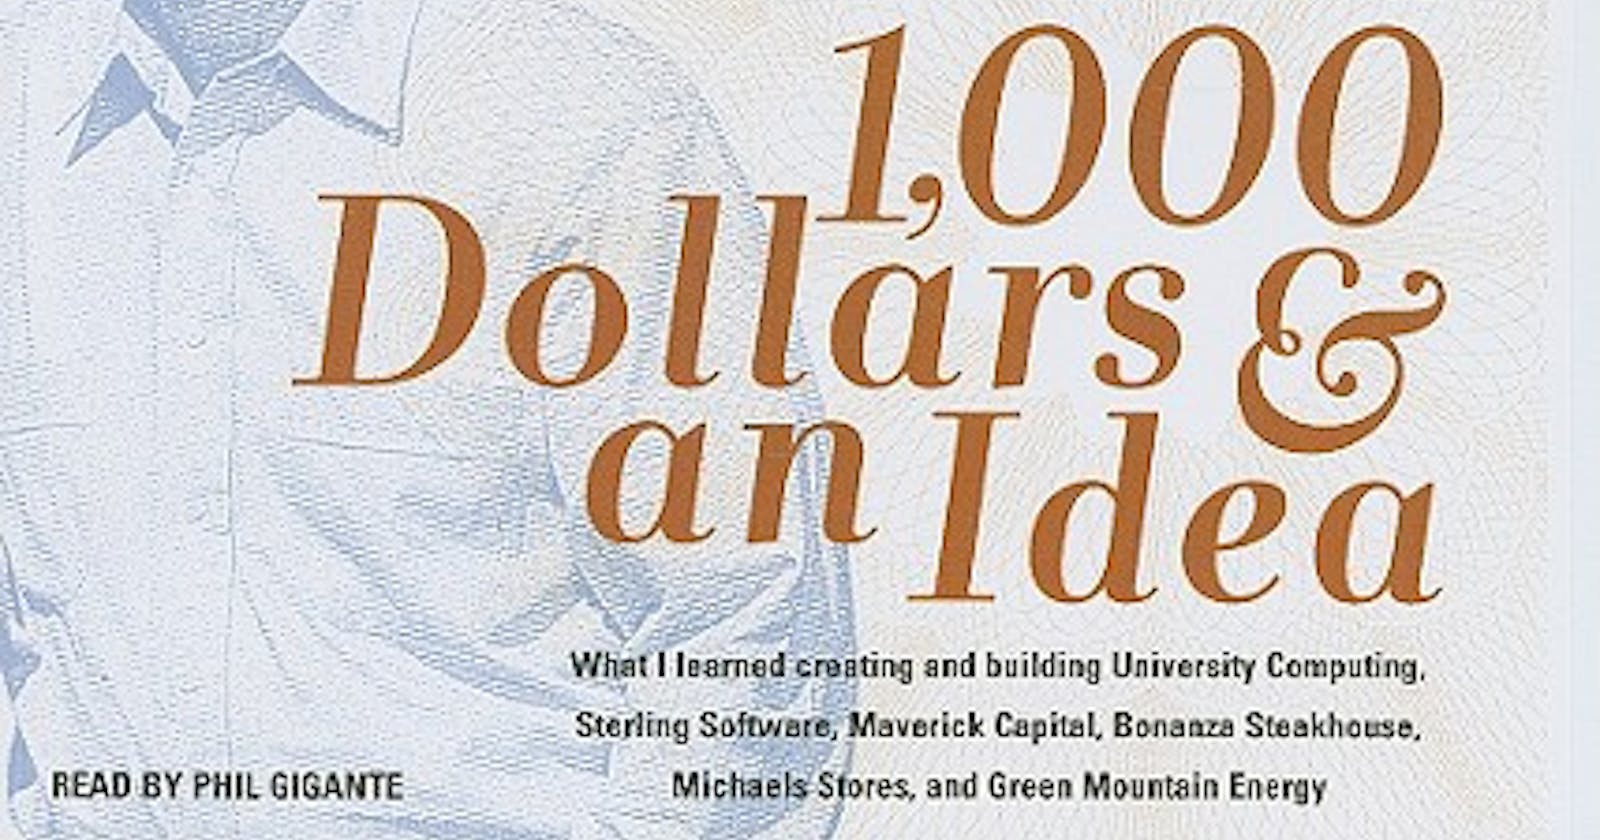 Book Review: 1,000 Dollars and an Idea